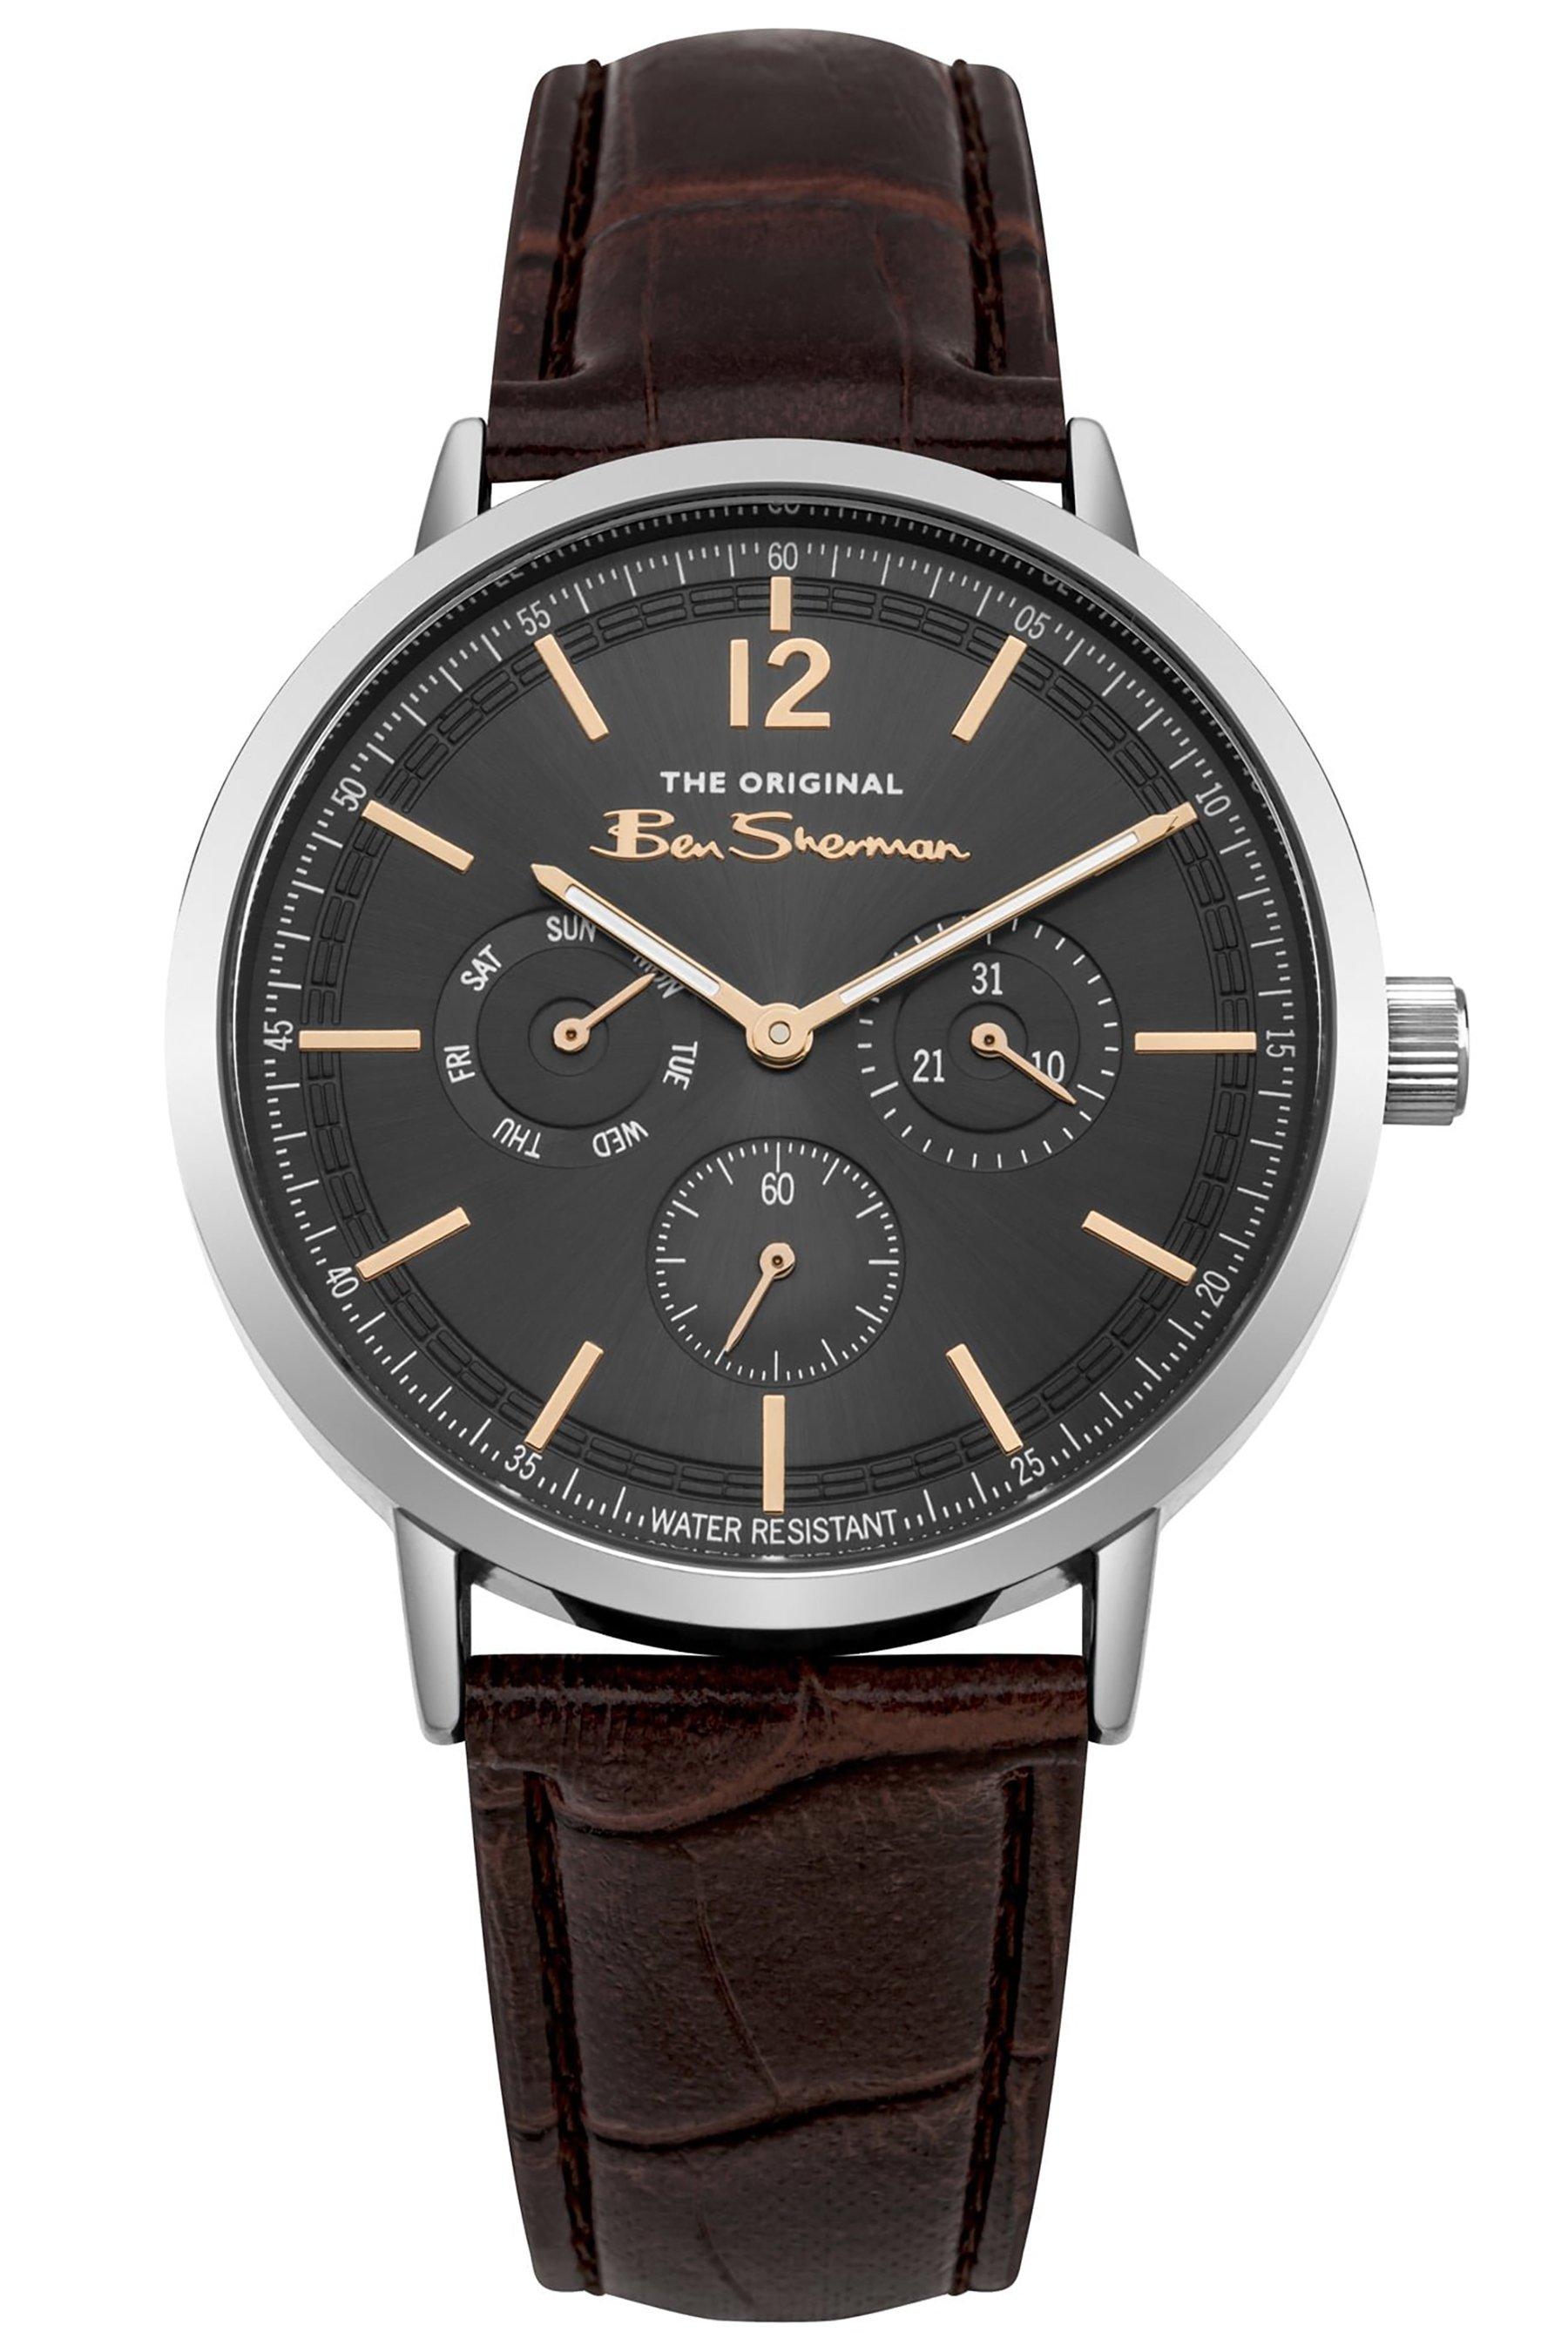 ben sherman brown leather strap watch - stainless steel